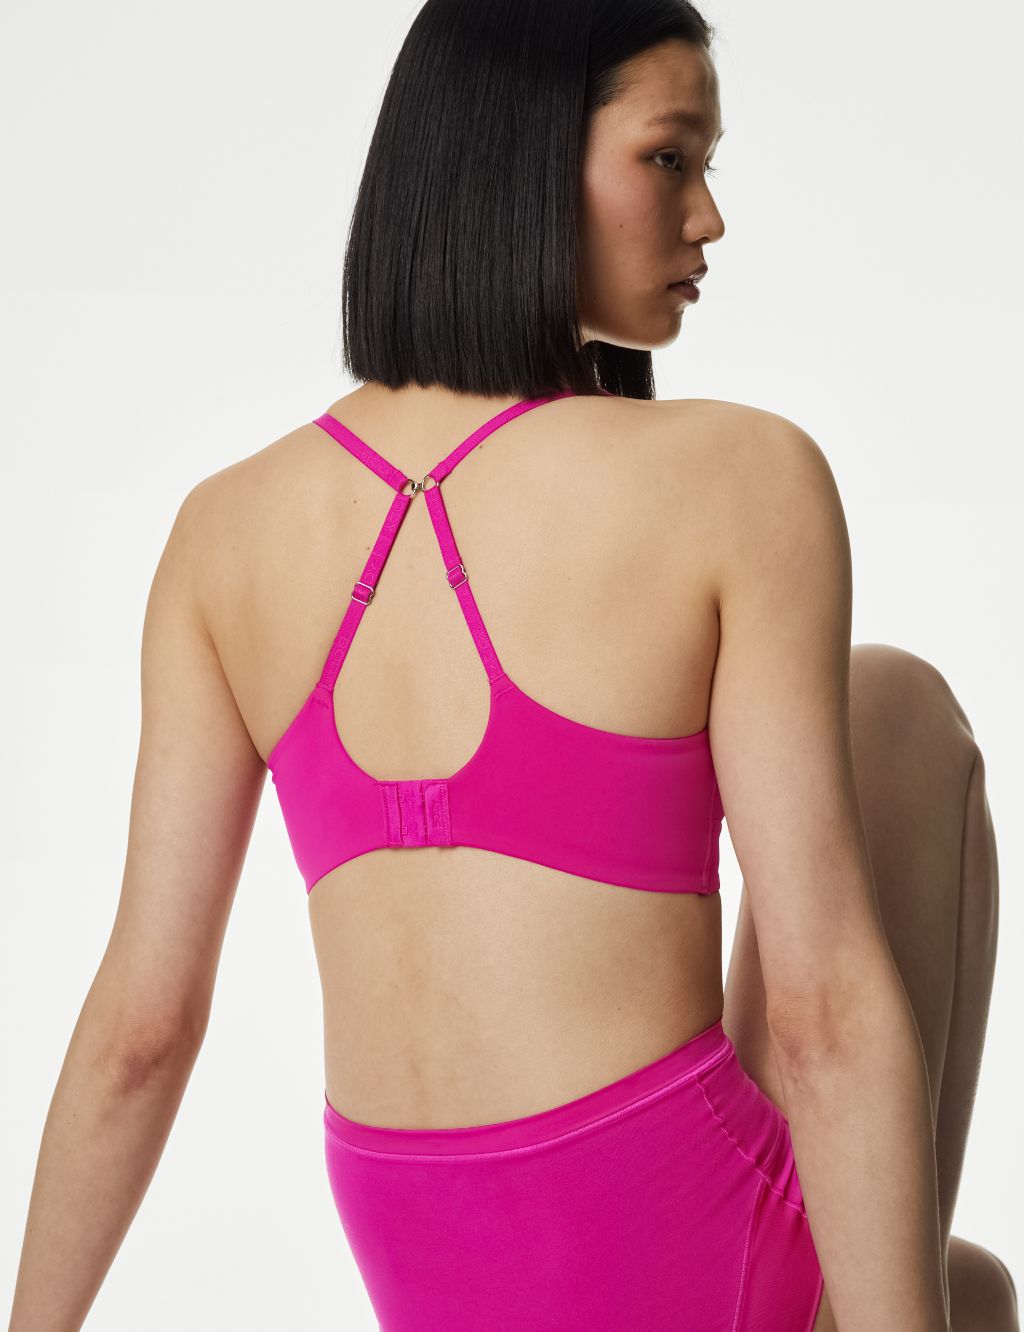 M&S FLEXIFIT with 360 stretch Lounger FULL CUP Non Wired Bra